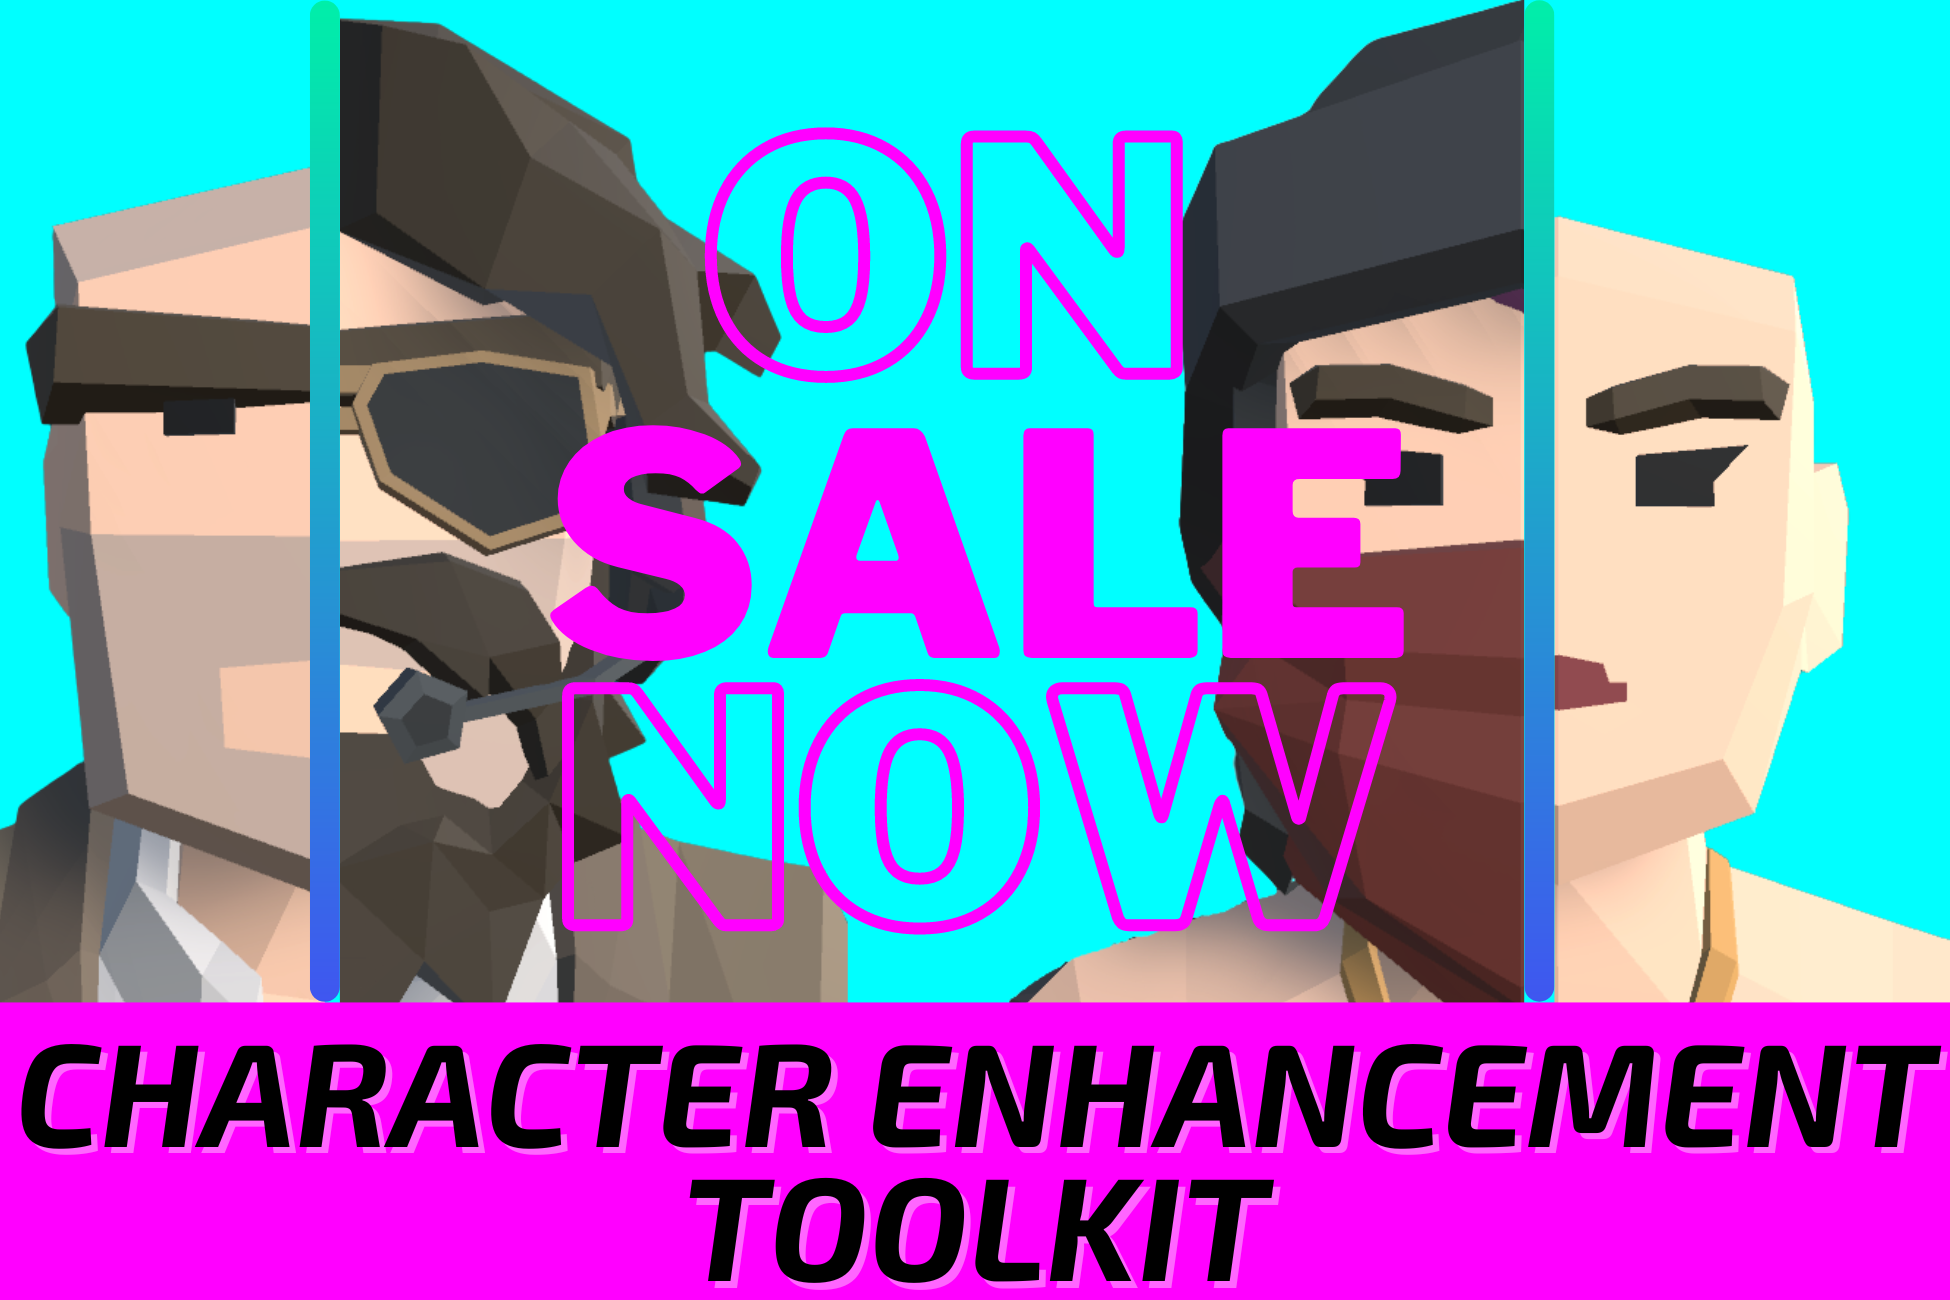 Unity Link to Character Enhancement Toolkit